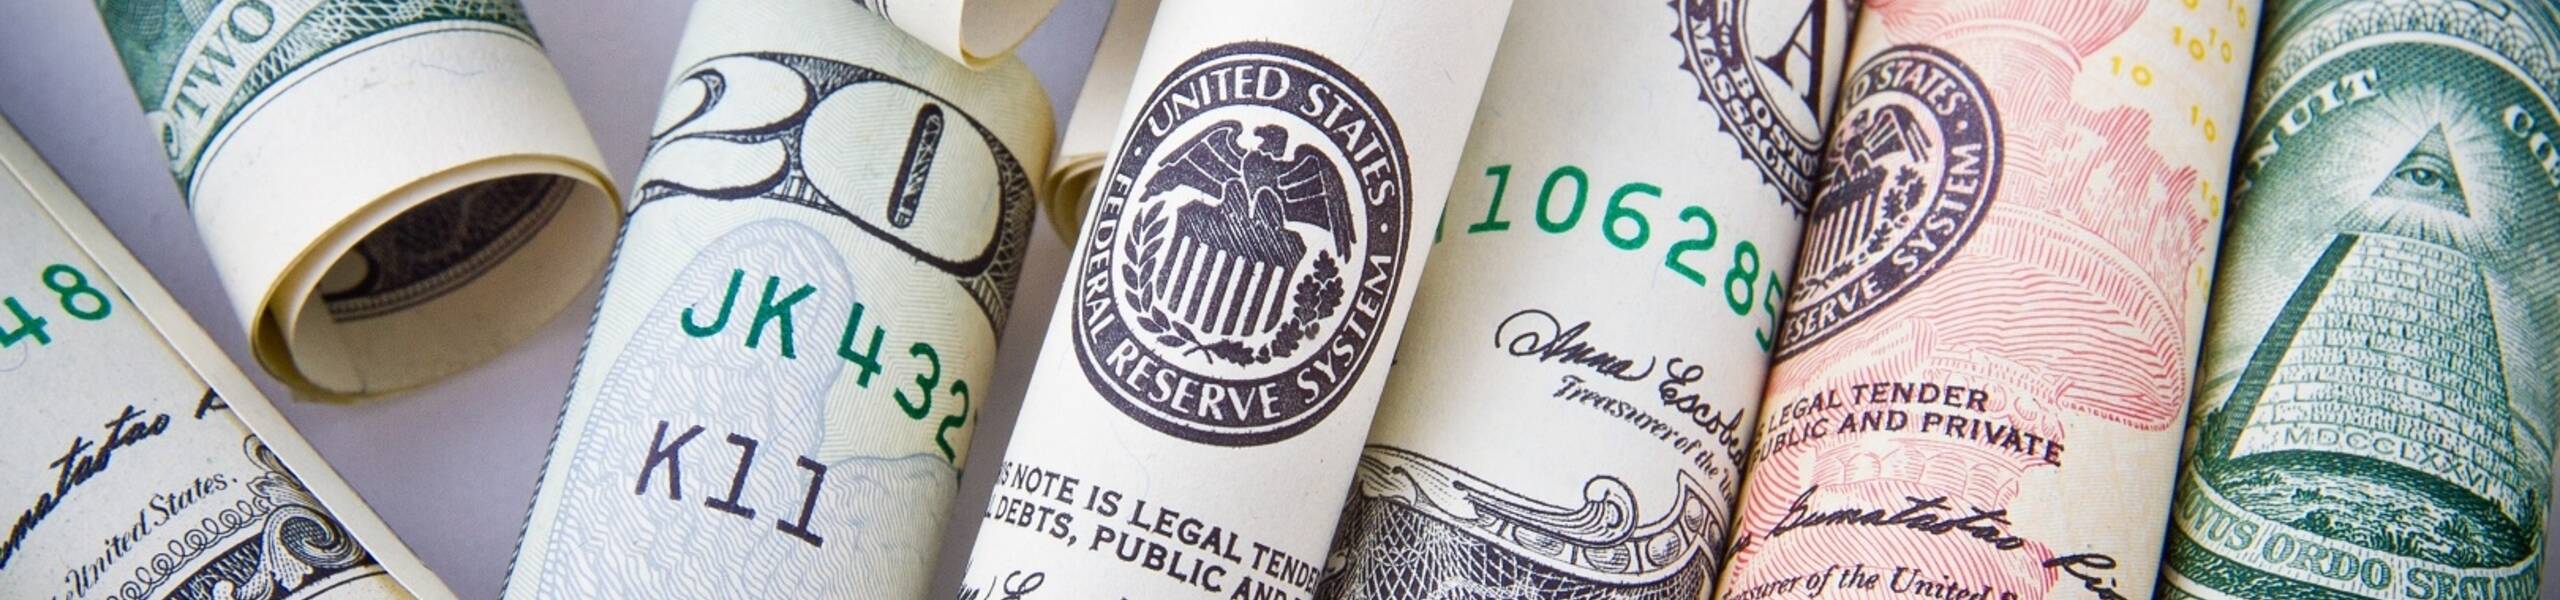 How Can NFP Release Affect the USD?